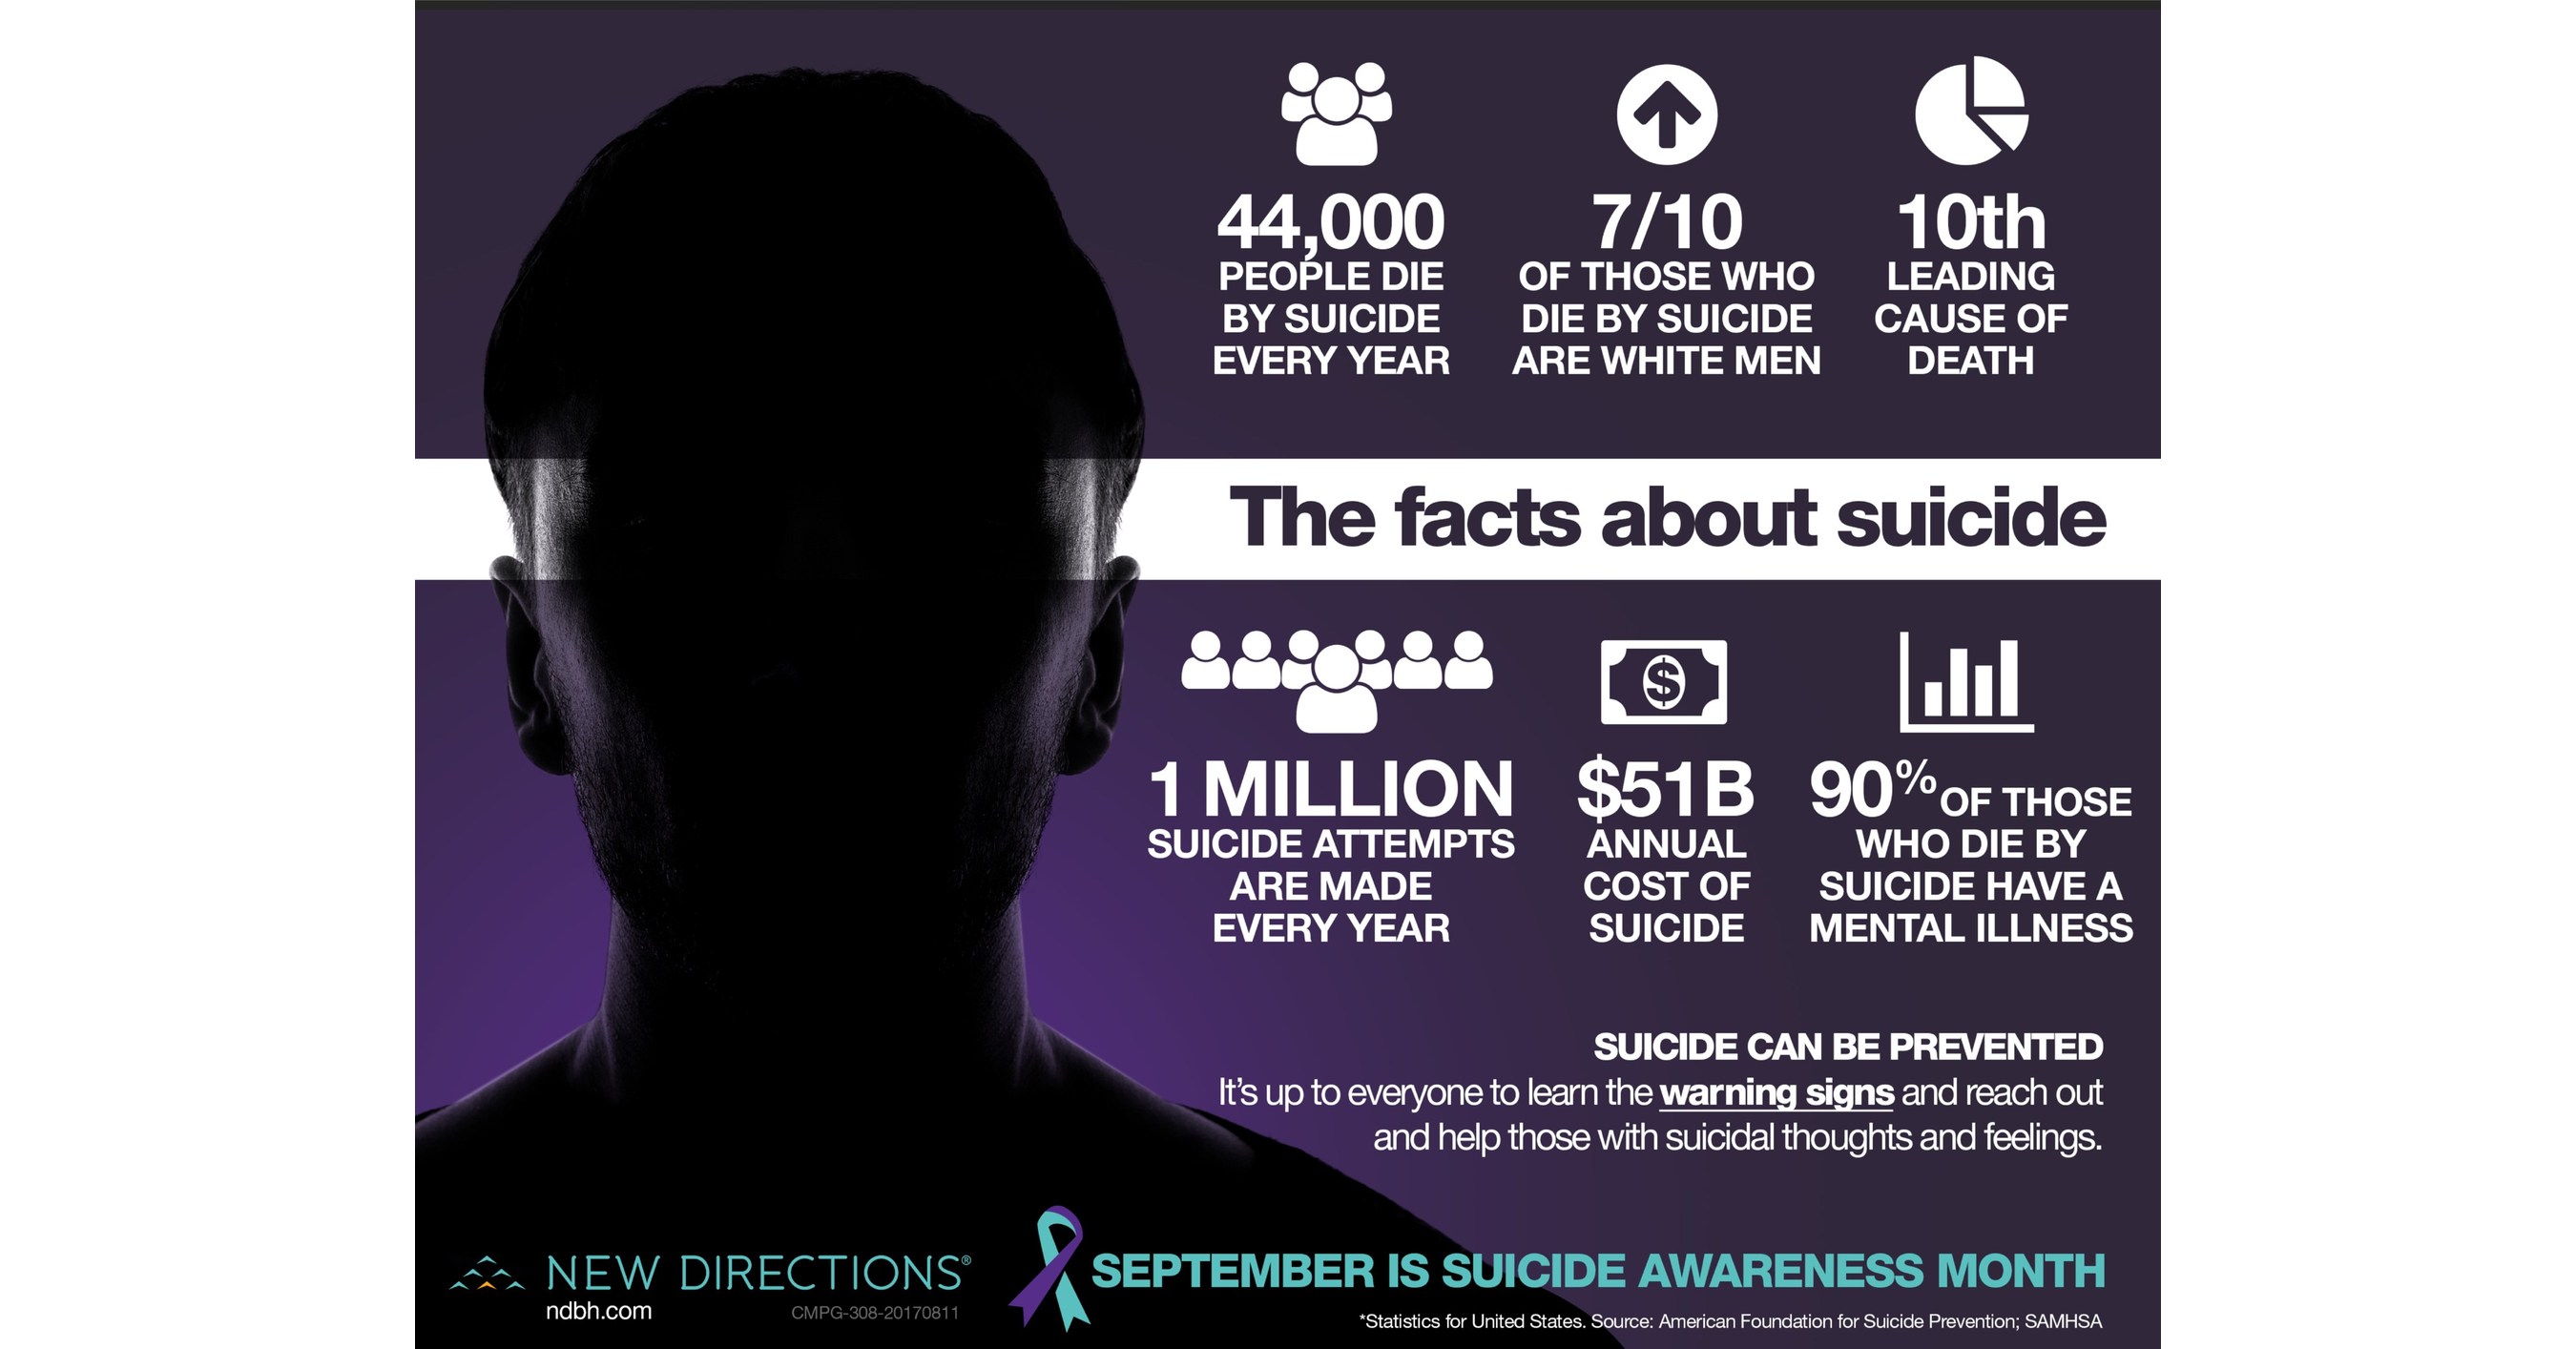 /PRNewswire-USNewswire/ -- Every day in America, 117 people die by suicide ...